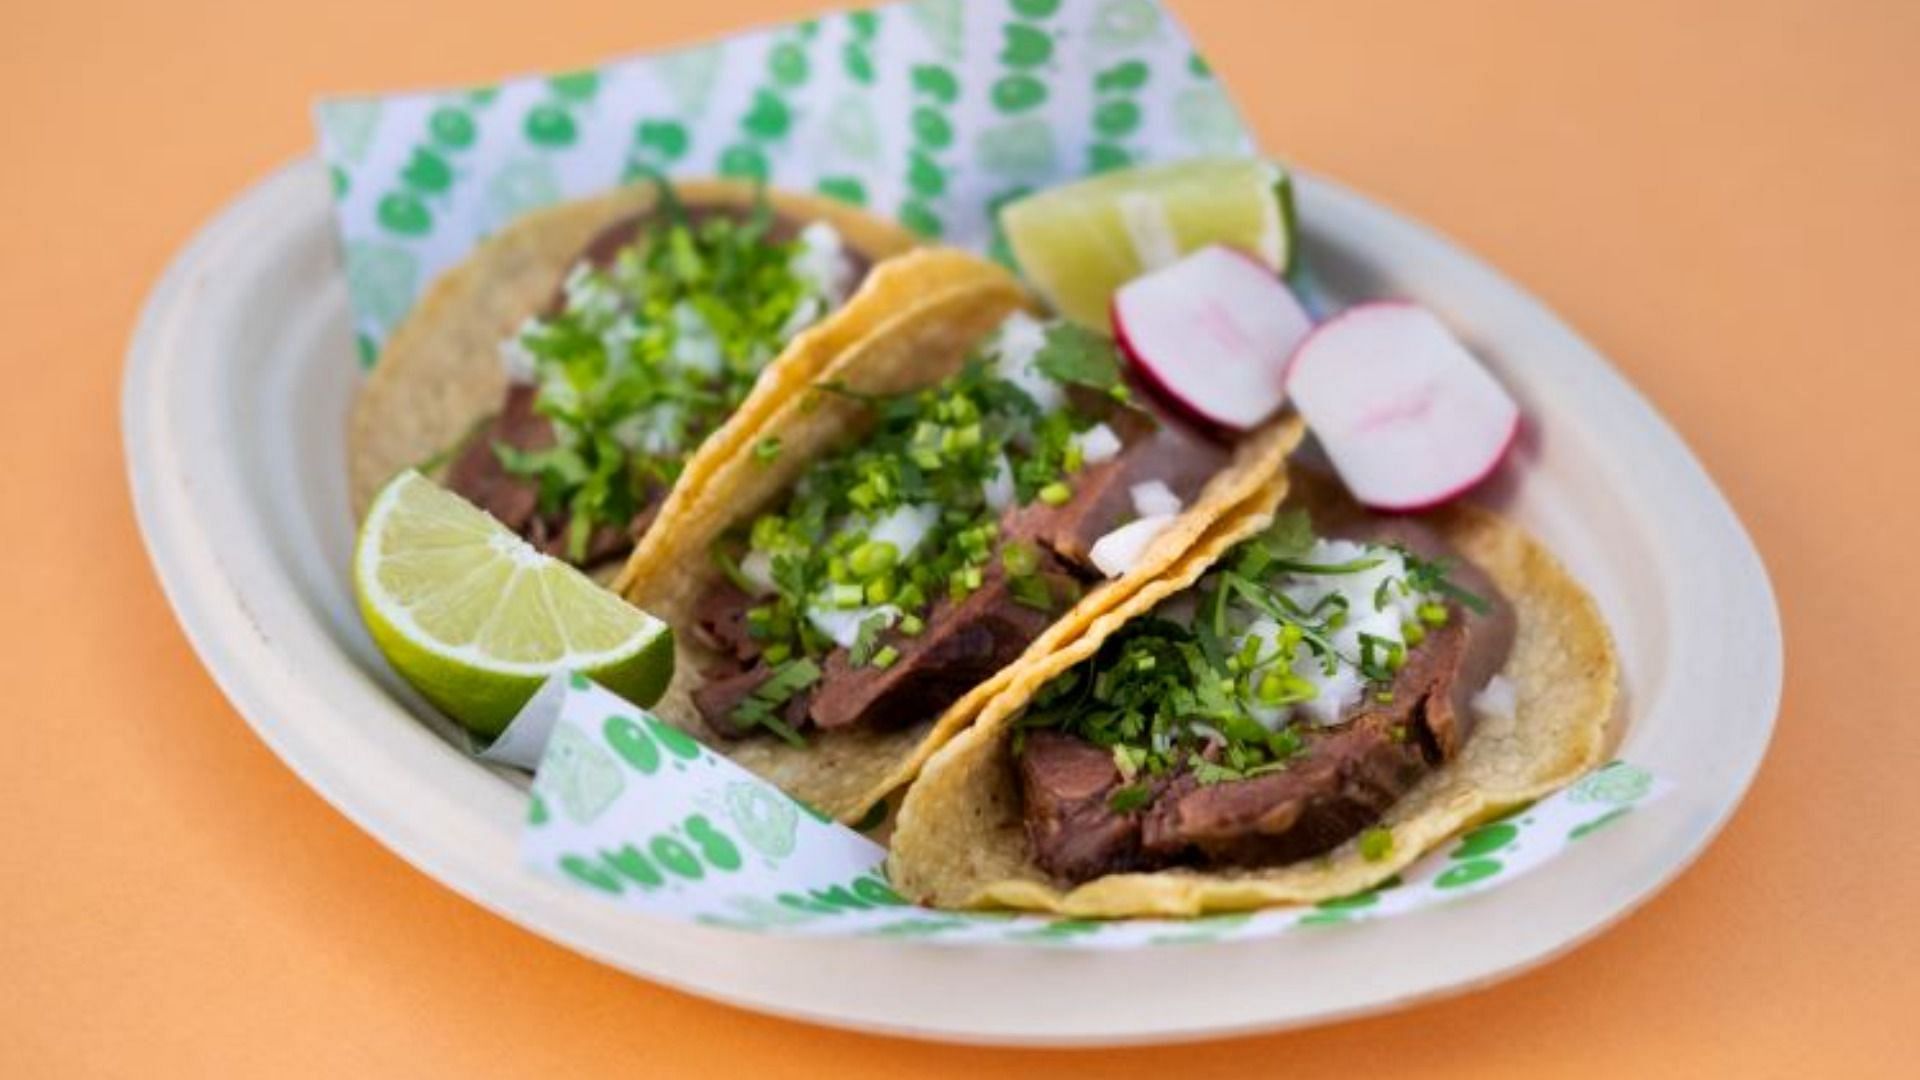 Duo&#039;s Taqueria will serve Mexican City-inspired street-style tacos in a variety of meat and vegan flavors (Image via Duo&#039;s Taqueria)